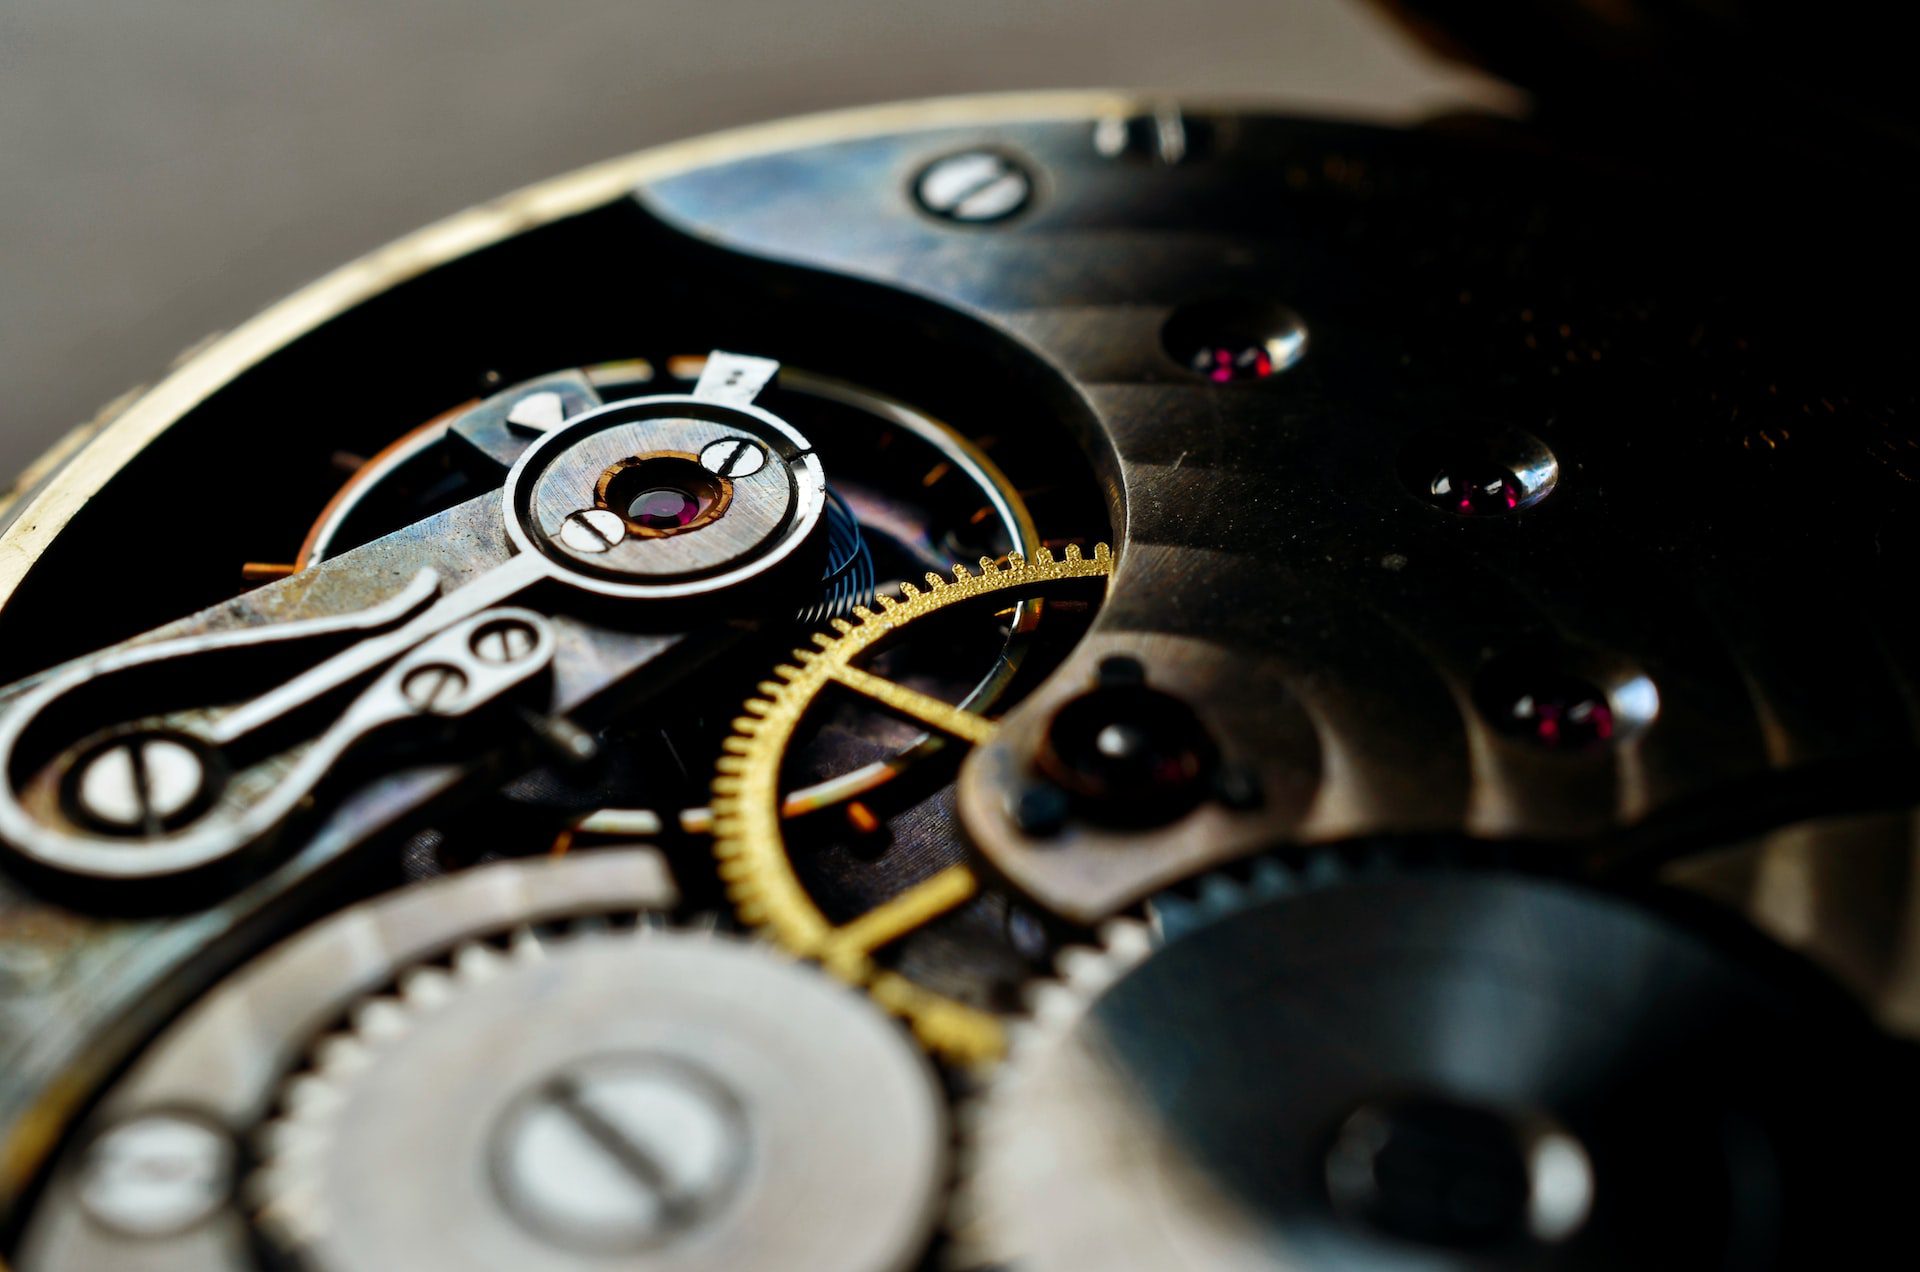 The history of the modern mechanical watch